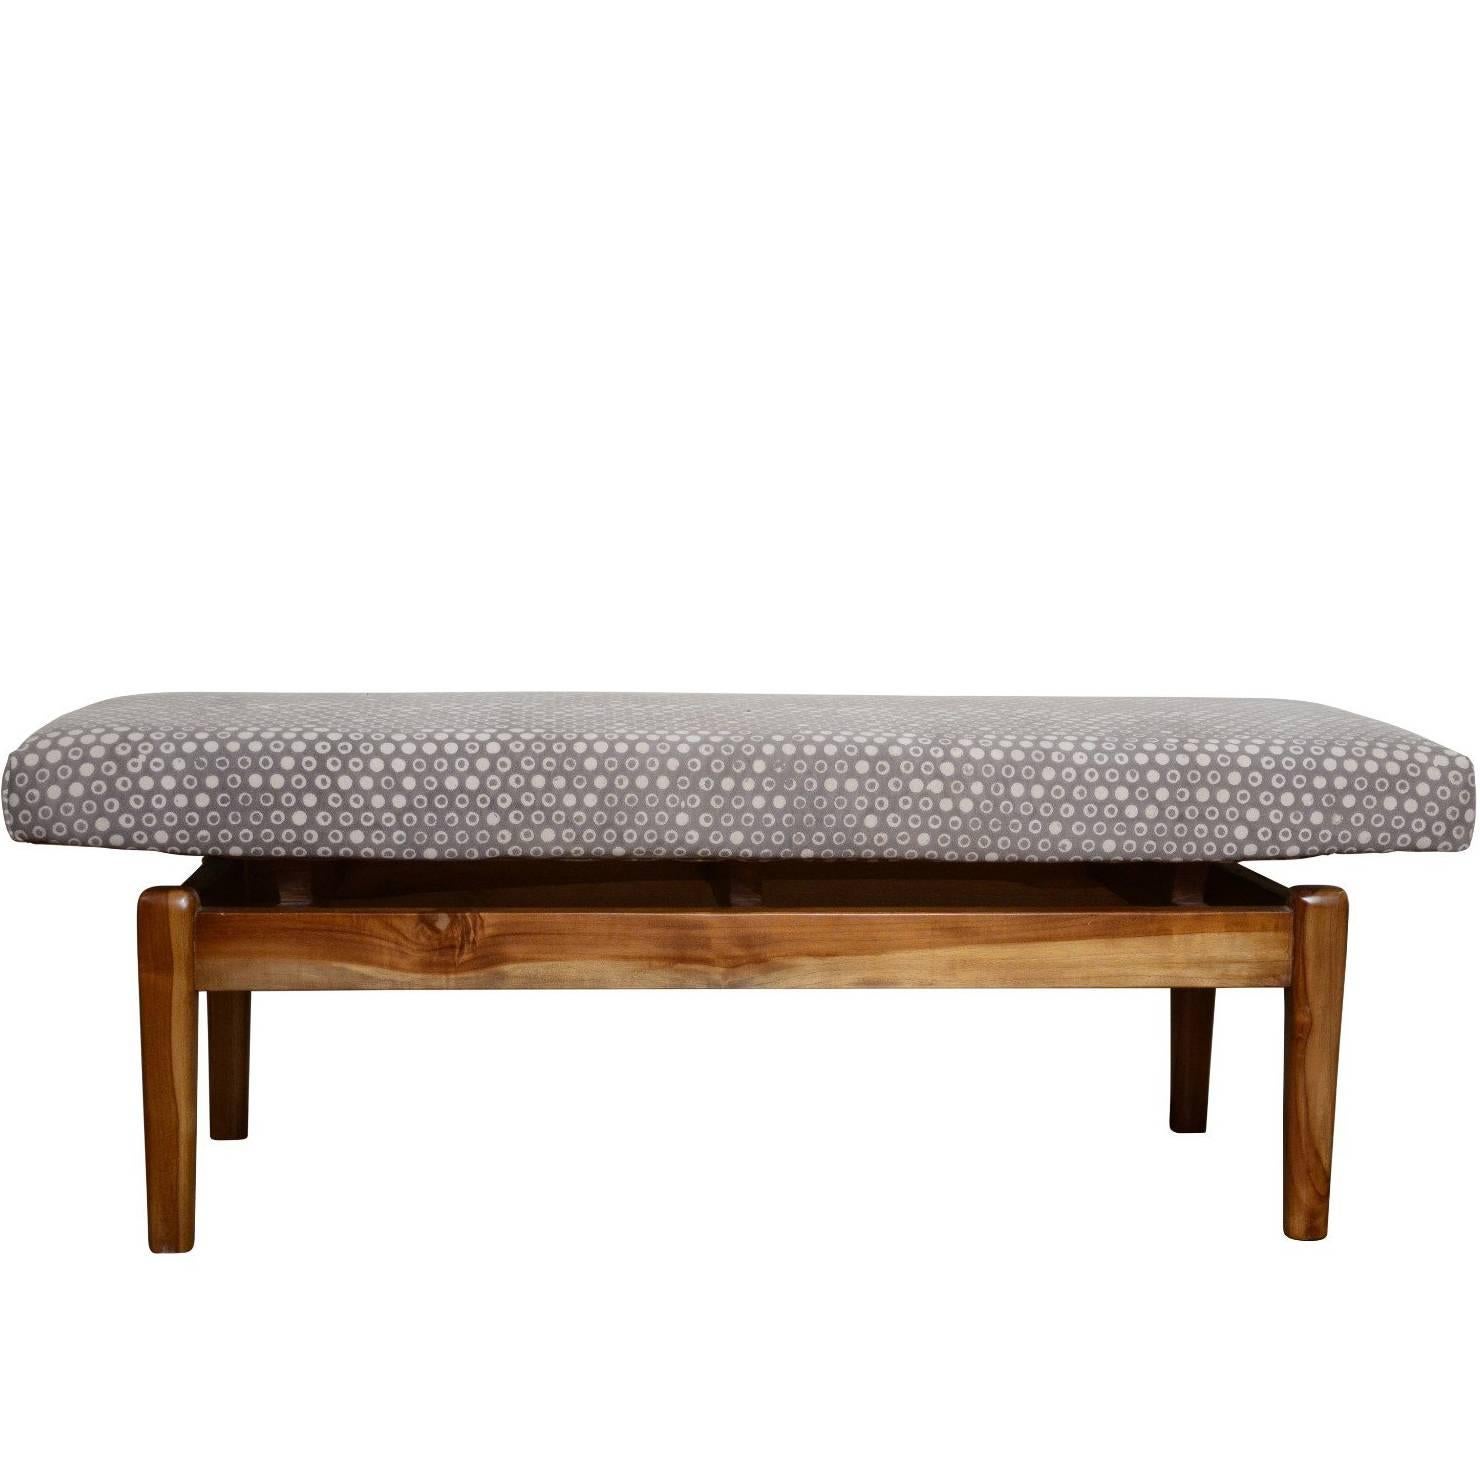 Contemporary Teak Bench Upholstered in Kashish Dyed Cotton